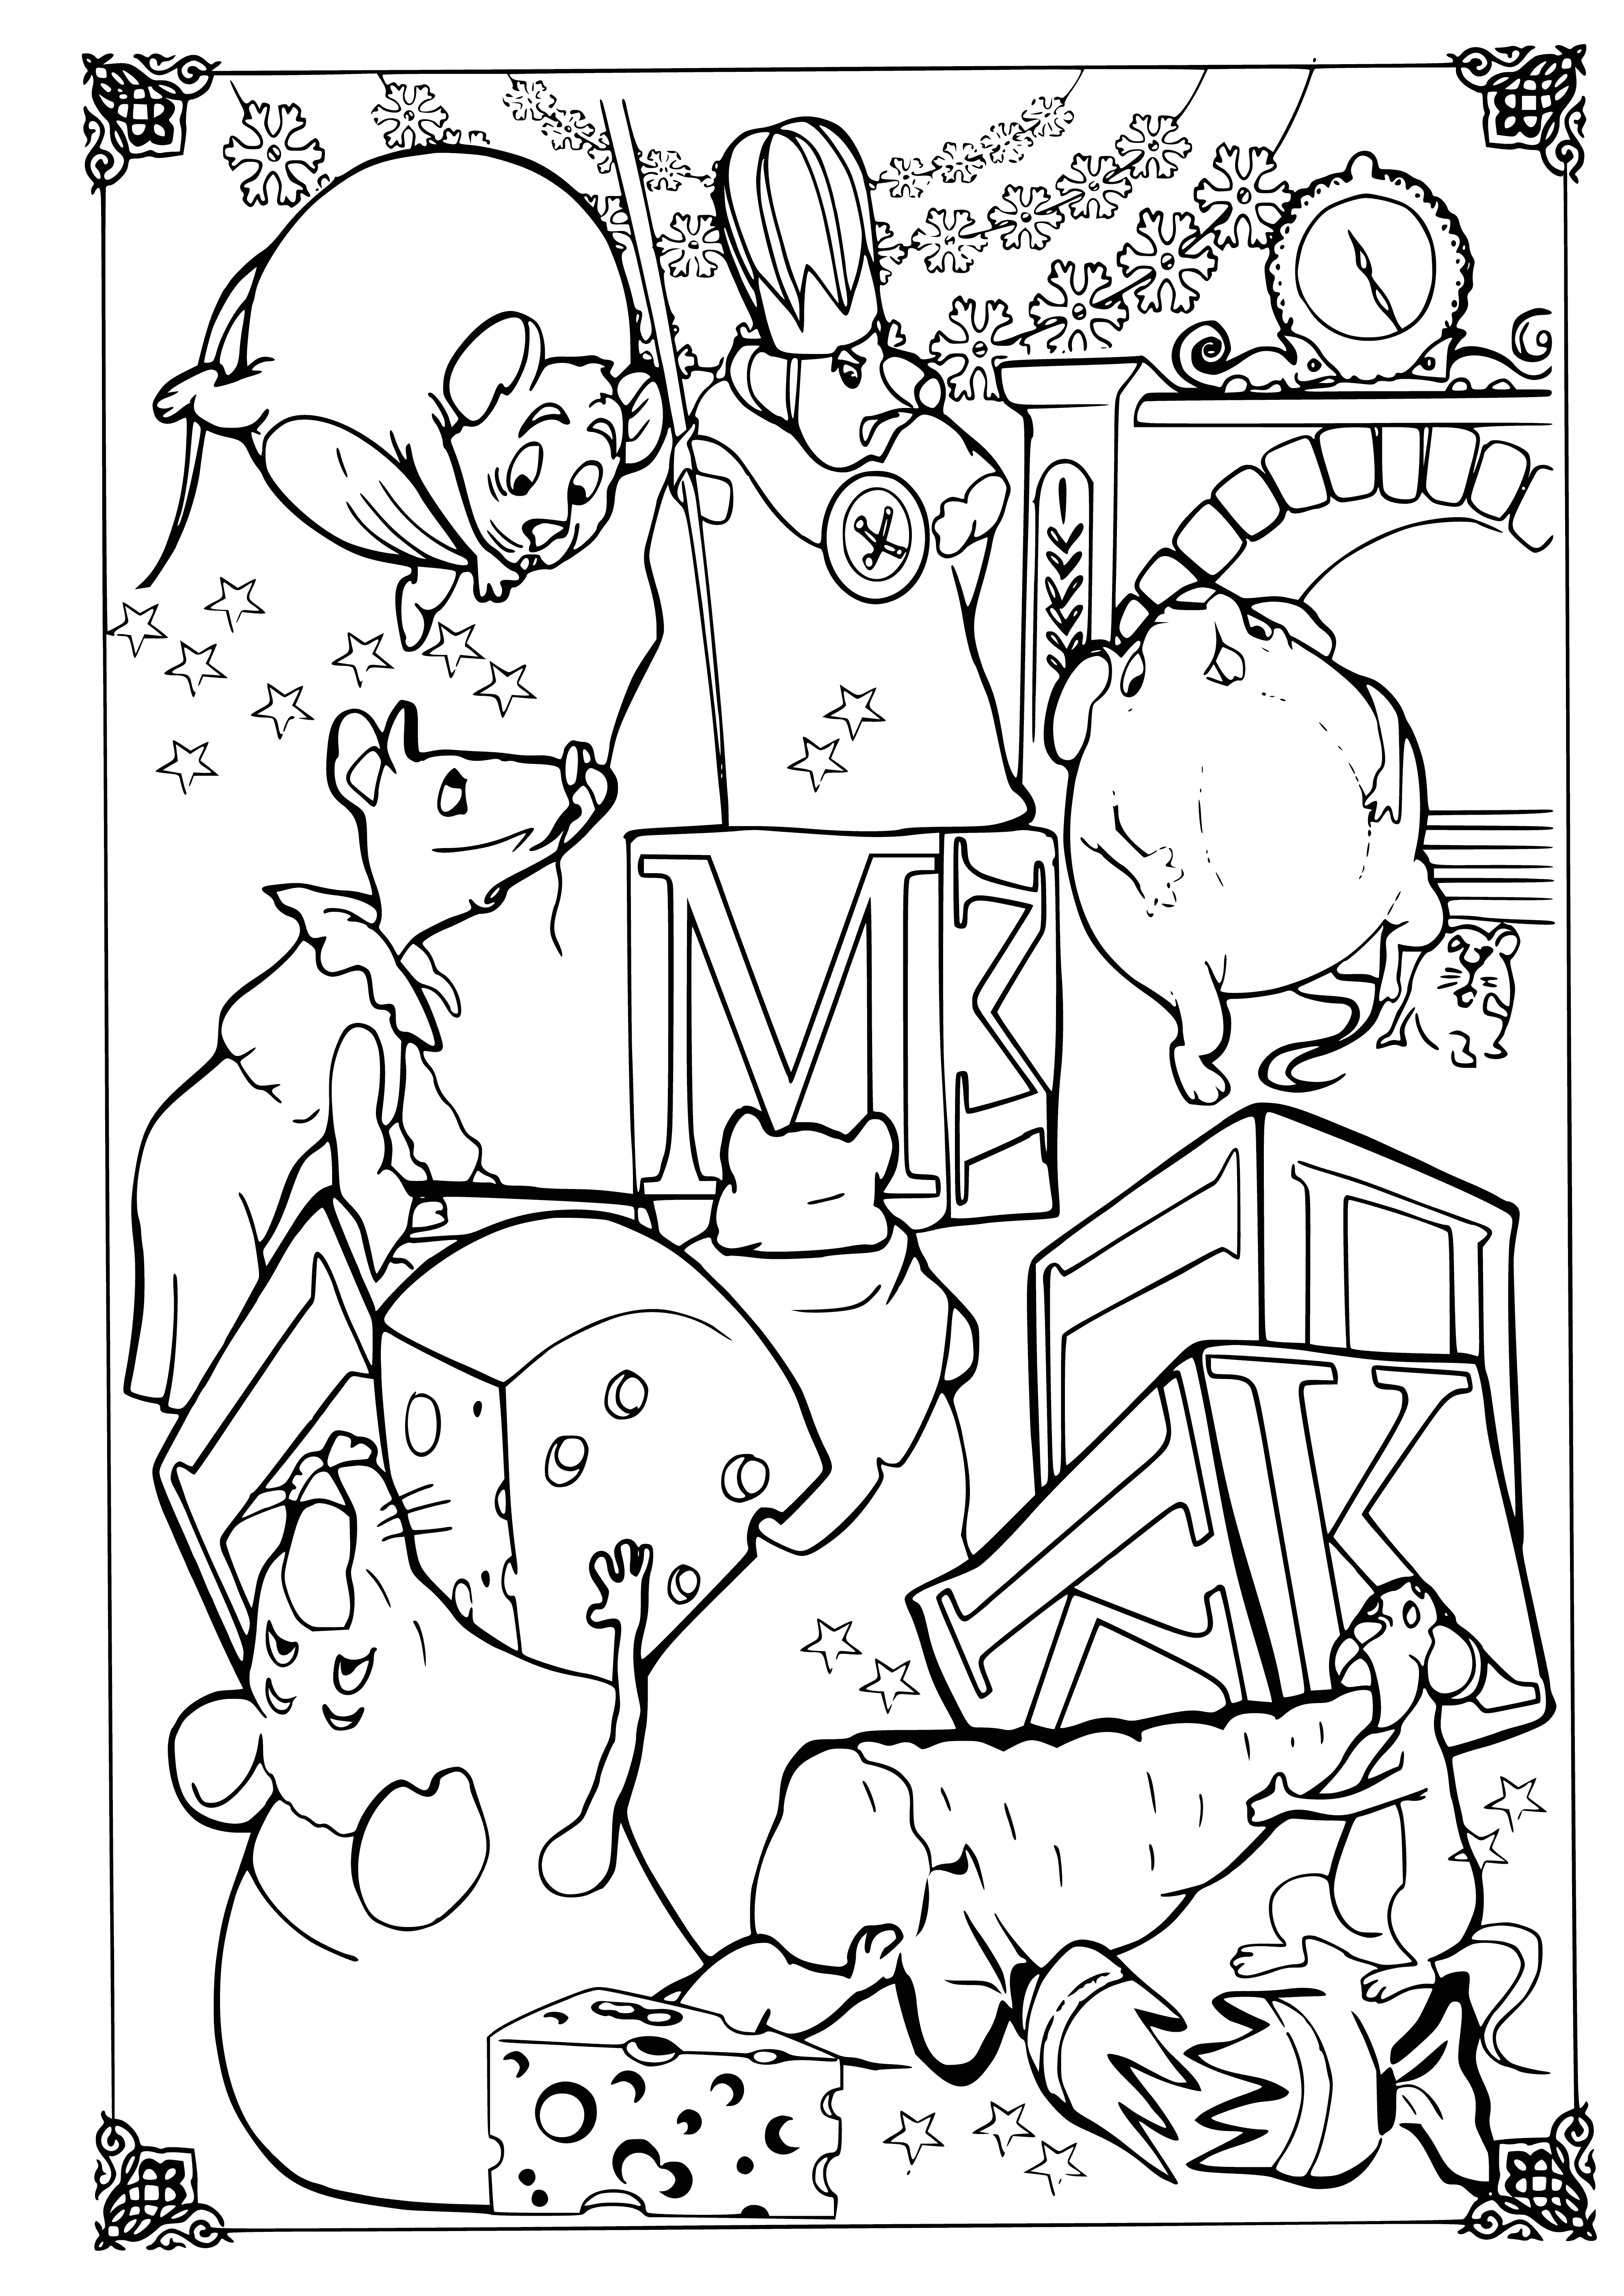 coloring page: Nutcracker stands with sword and sack, surrounded by mouse corpses and a few scurrying mice. A menacing look fills his face.